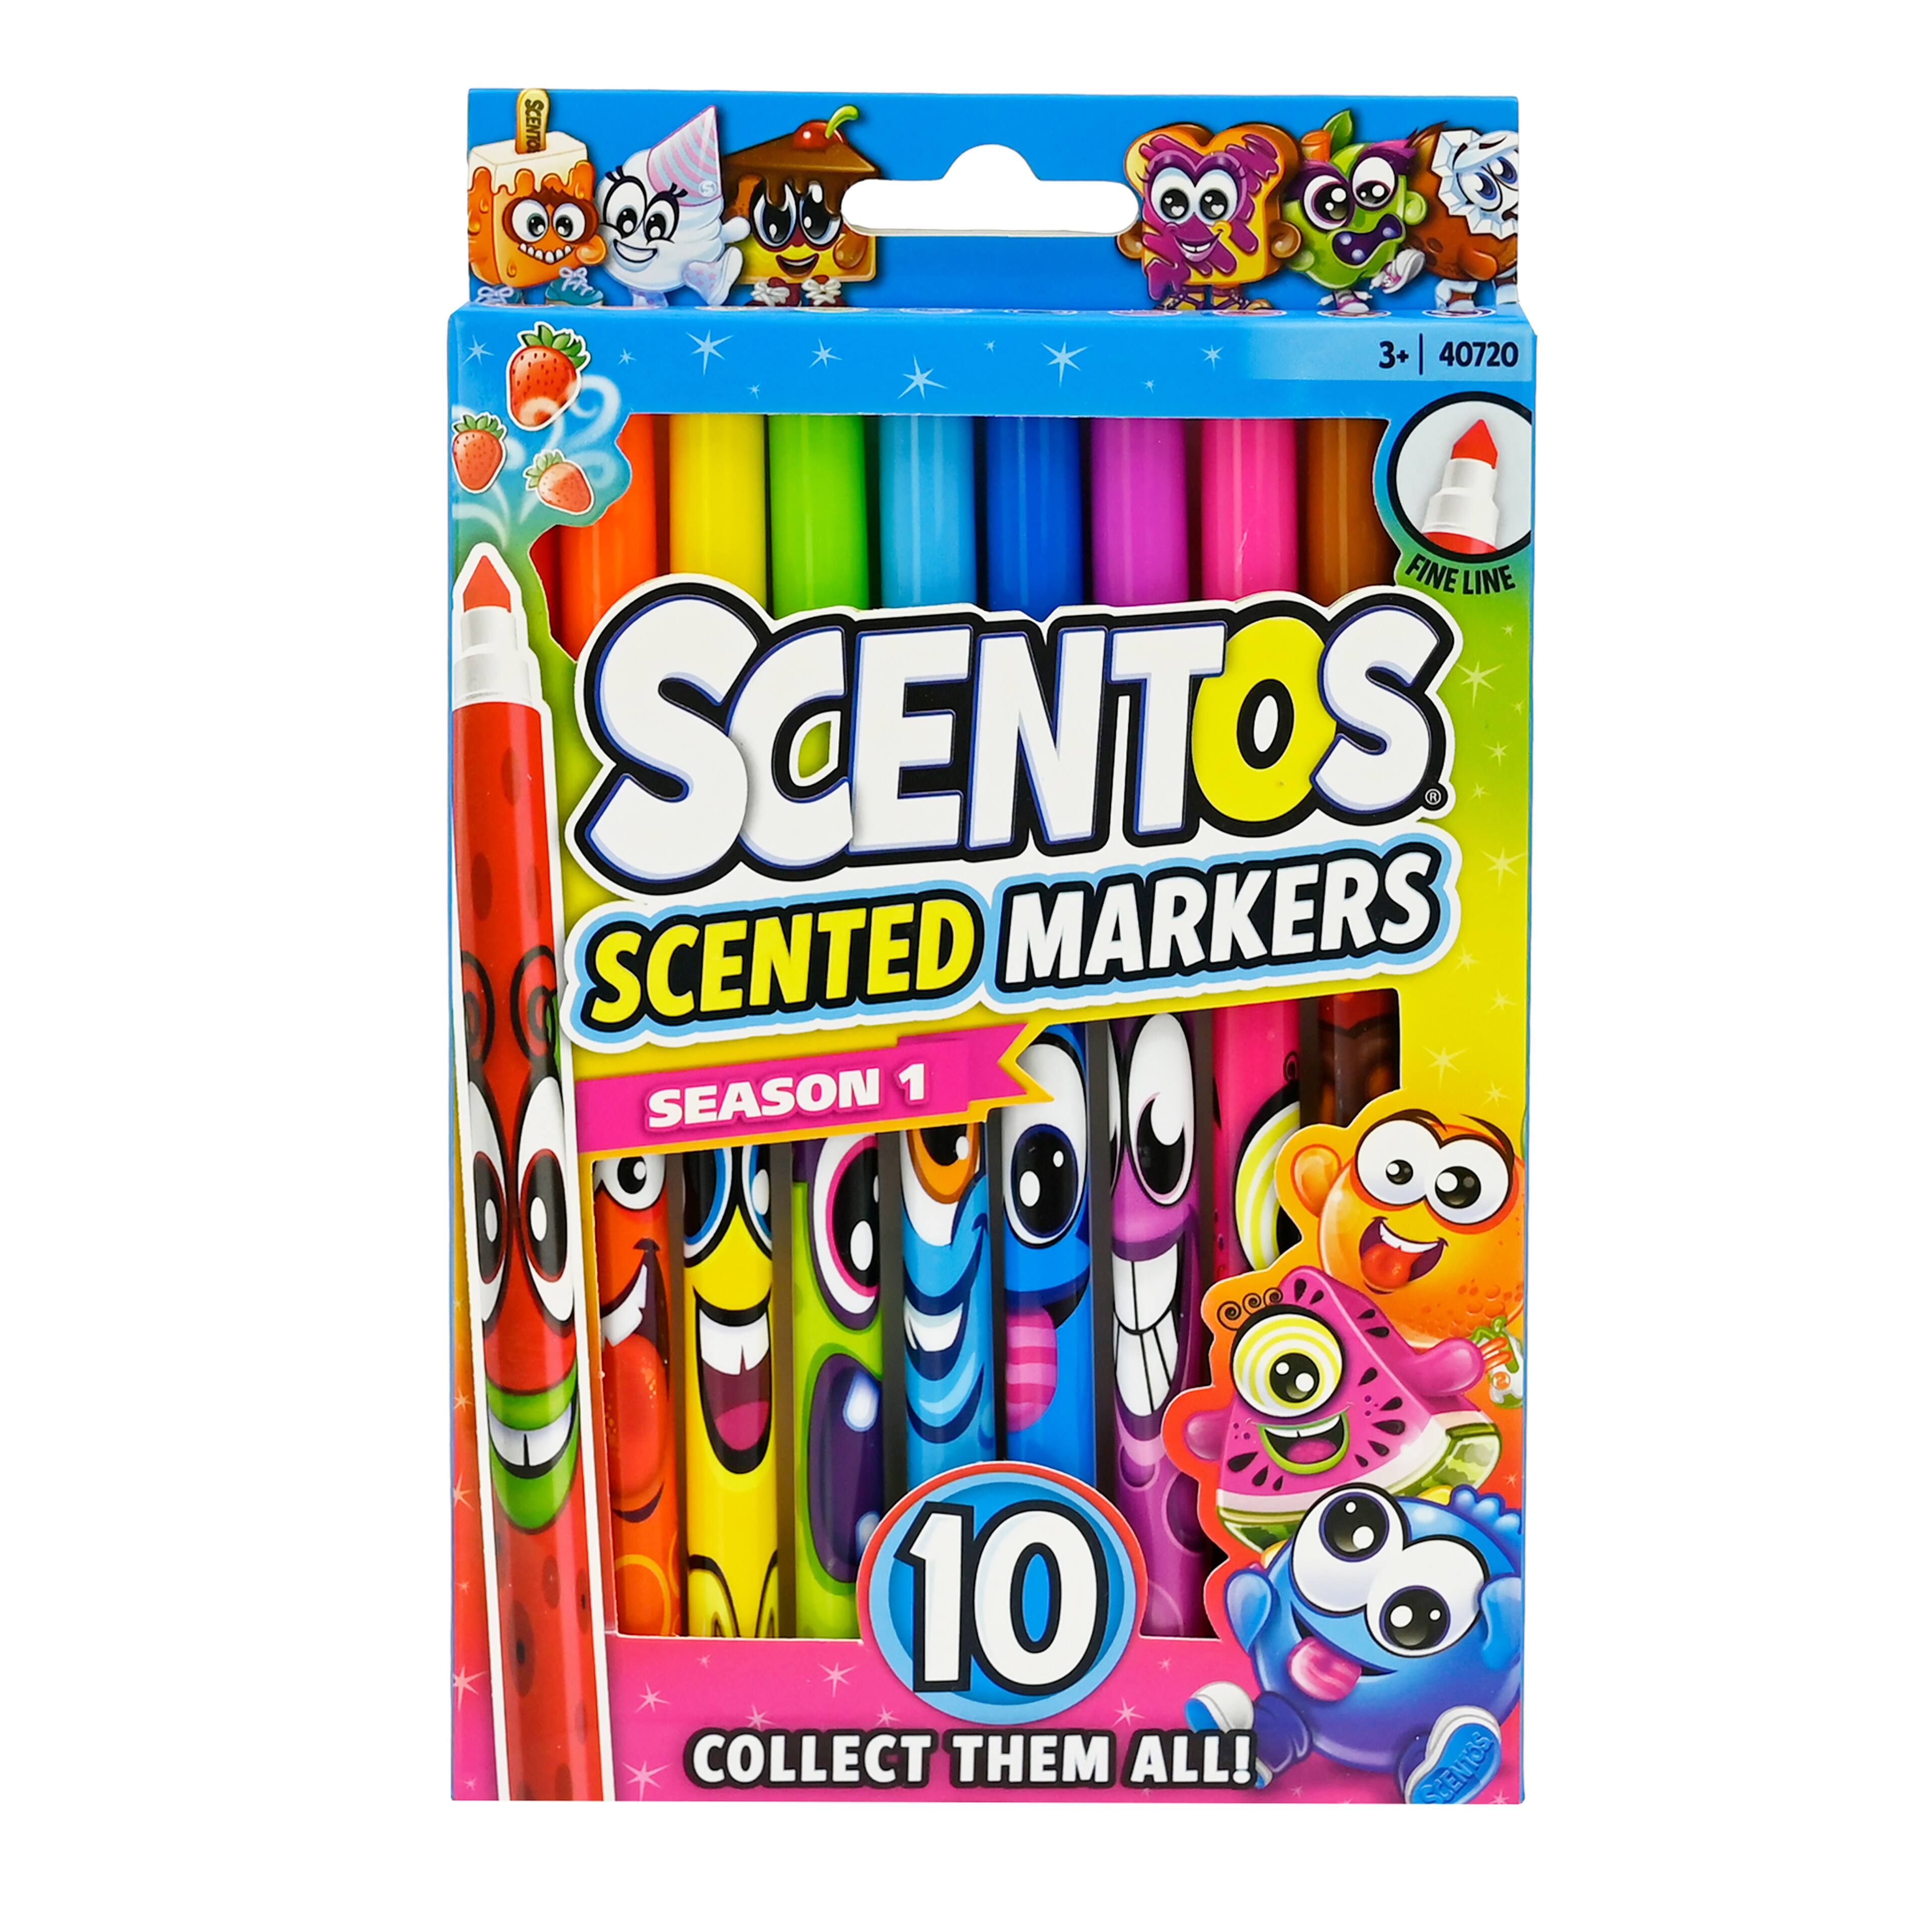 Mr. Sketch® Scented Markers, 4 Packs of 8